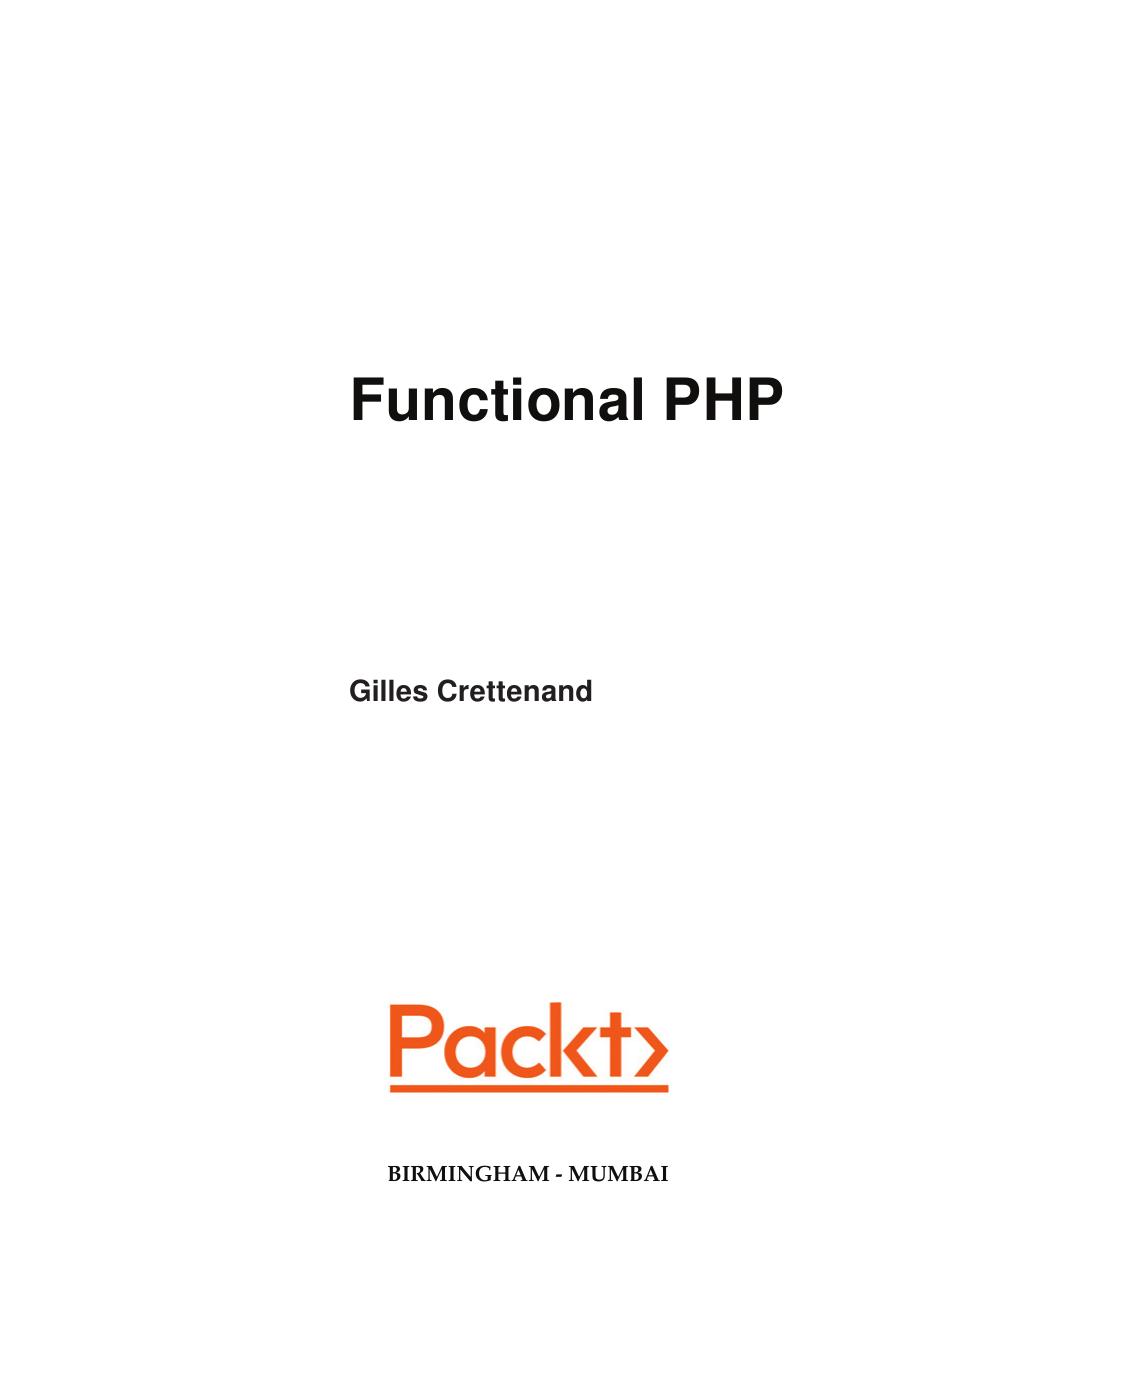 Functional PHP by Gilles Crettenand